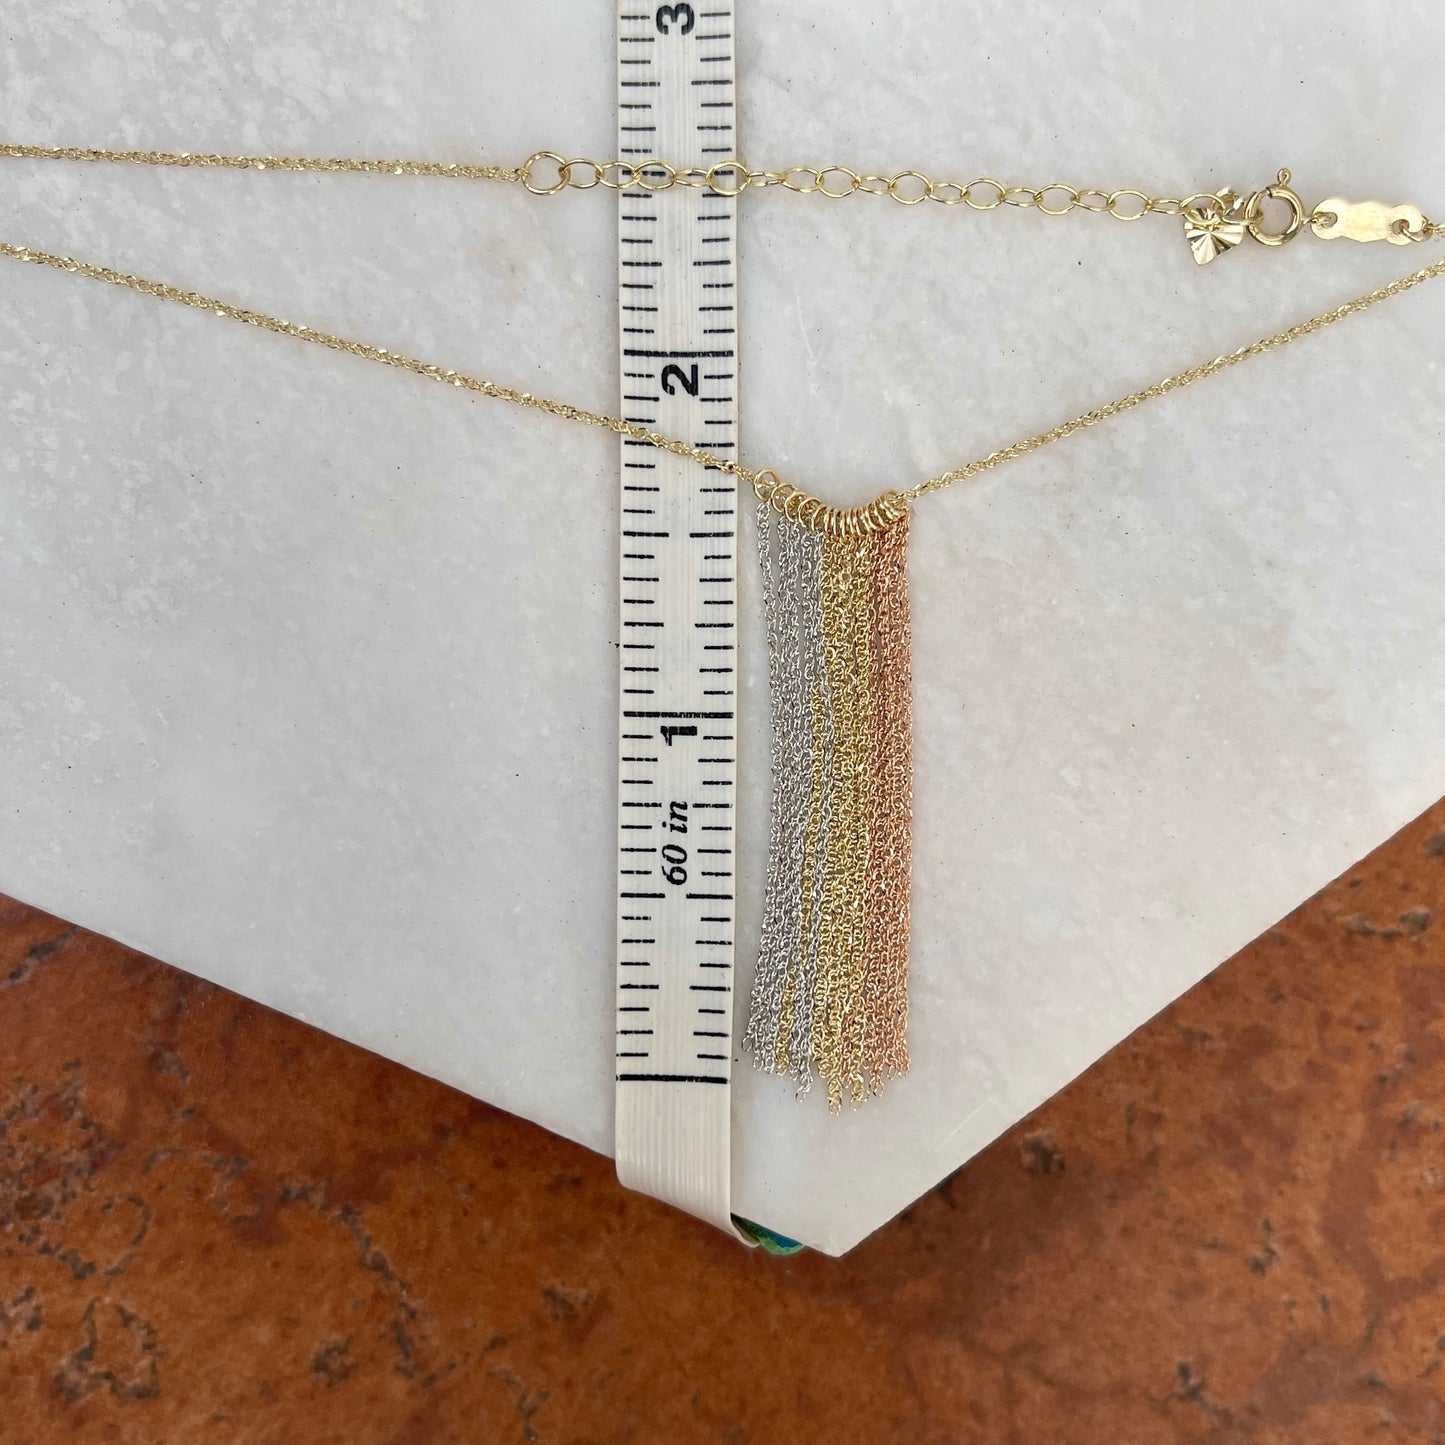 14KT Yellow Gold, Rose Gold, + White Gold Tassel Chain Lariat Necklace